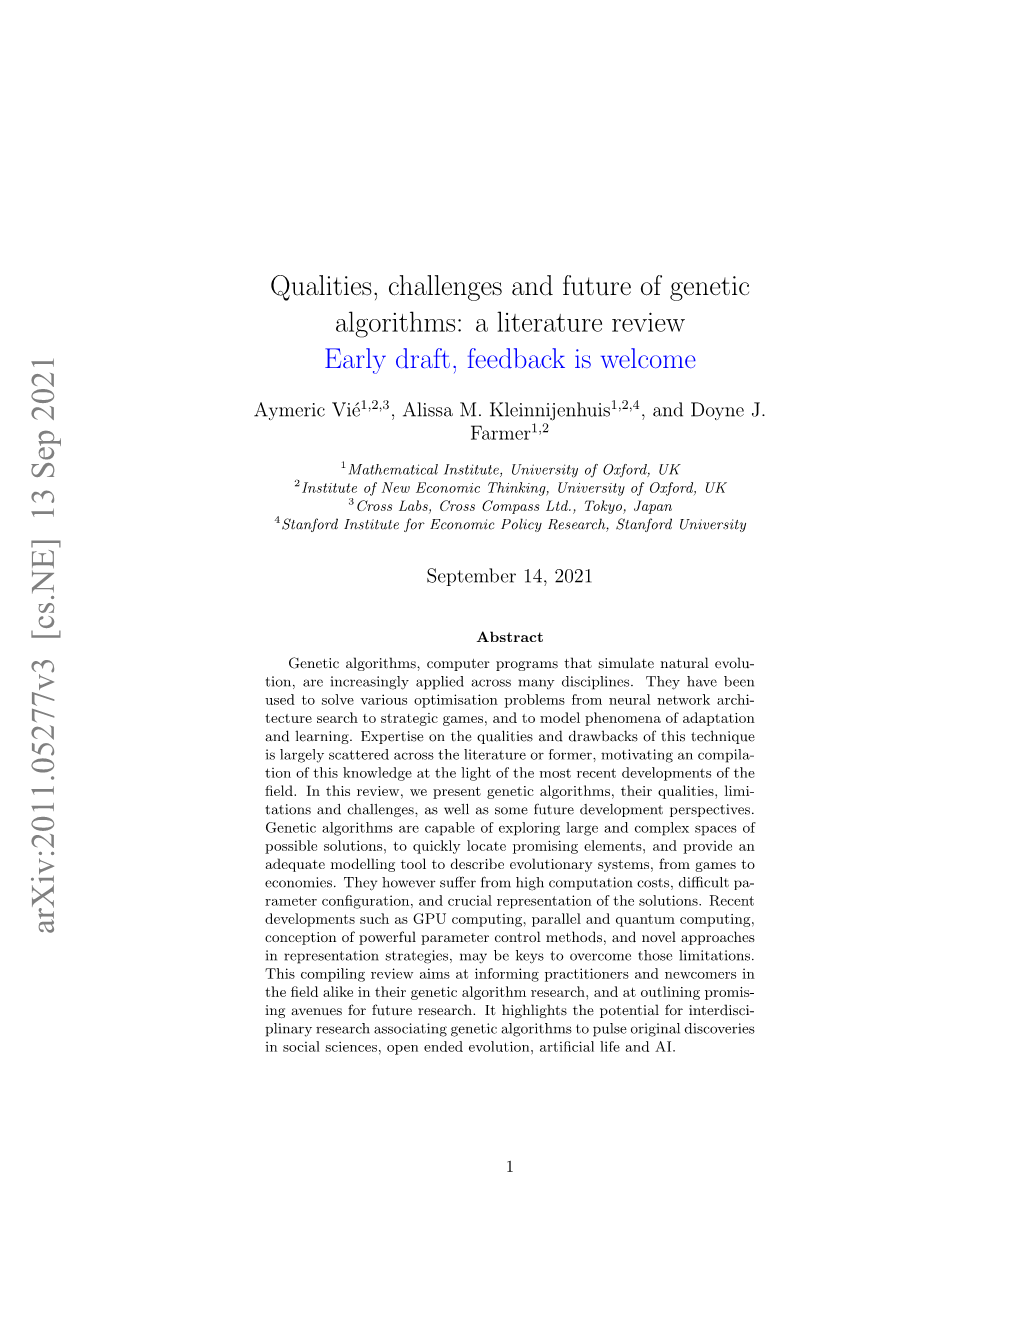 Qualities, Challenges and Future of Genetic Algorithms: a Literature Review Early Draft, Feedback Is Welcome